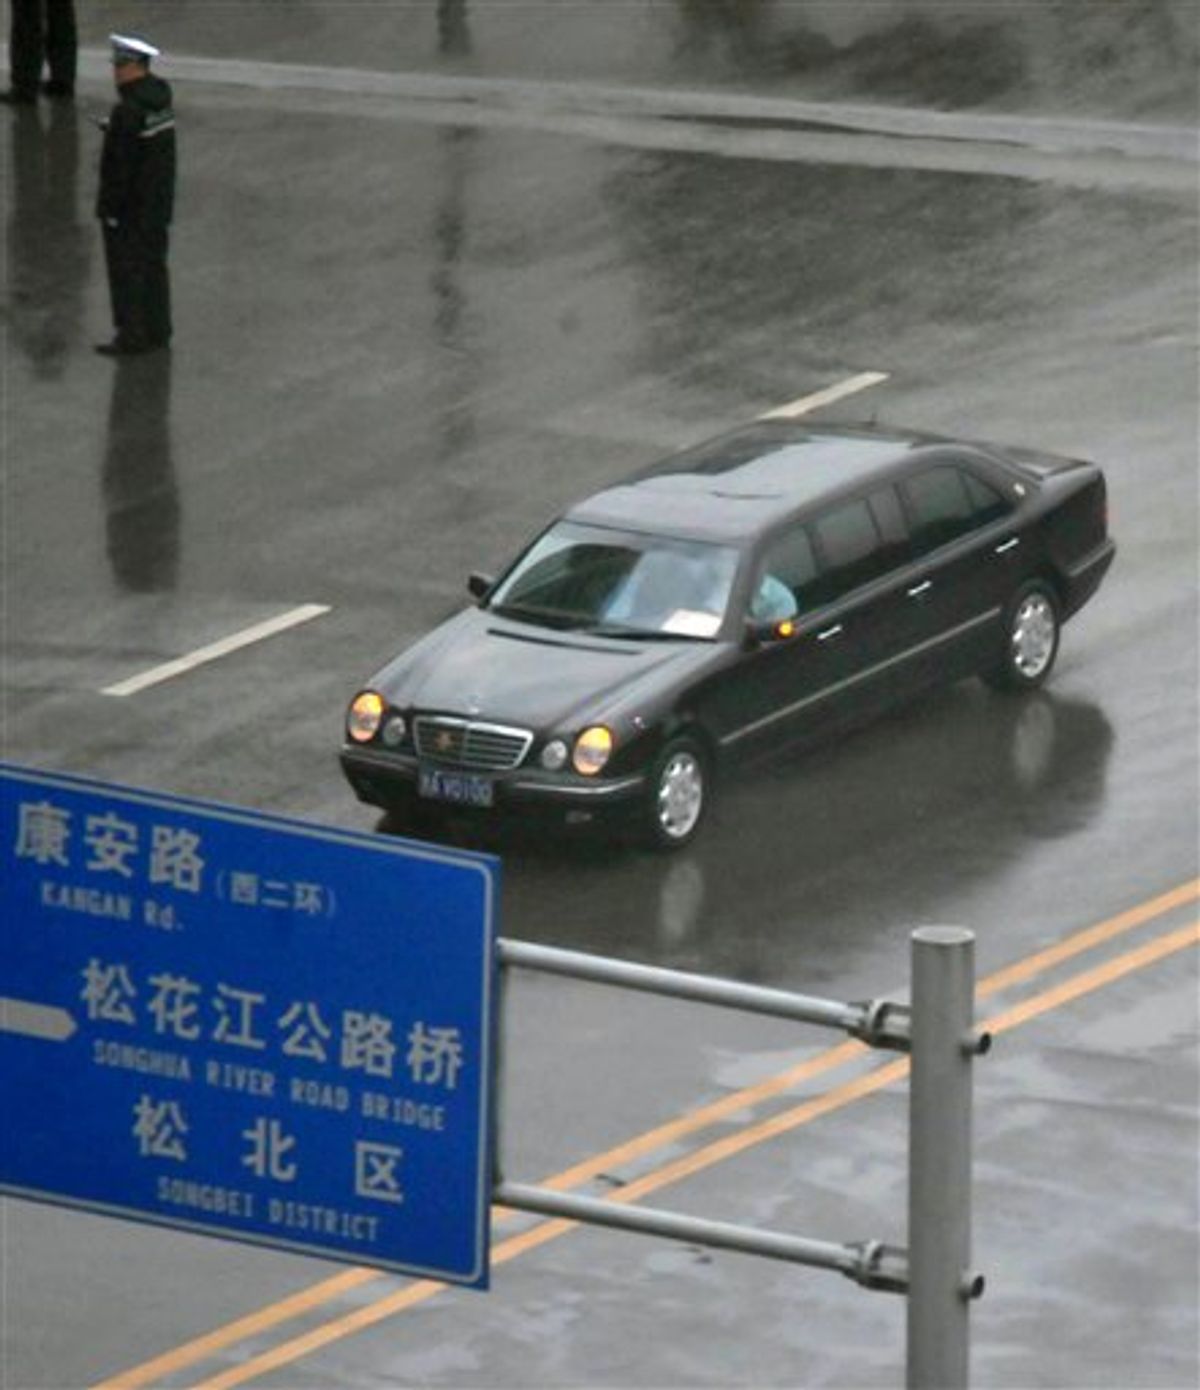 A limousine, that Japan's Kyodo News said is believed to be carrying North Korean leader Kim Jong Il, drives through a street in Harbin, northeastern China, Sunday, Aug. 29, 2010. Kim visited Harbin on Sunday while on a secretive trip reportedly aimed at drumming up support for a succession plan involving his youngest son, a news report said. (AP Photo/Kyodo News) ** JAPAN OUT, MANDATORY CREDIT, FOR COMMERCIAL USE ONLY IN NORTH AMERICA ** (AP)